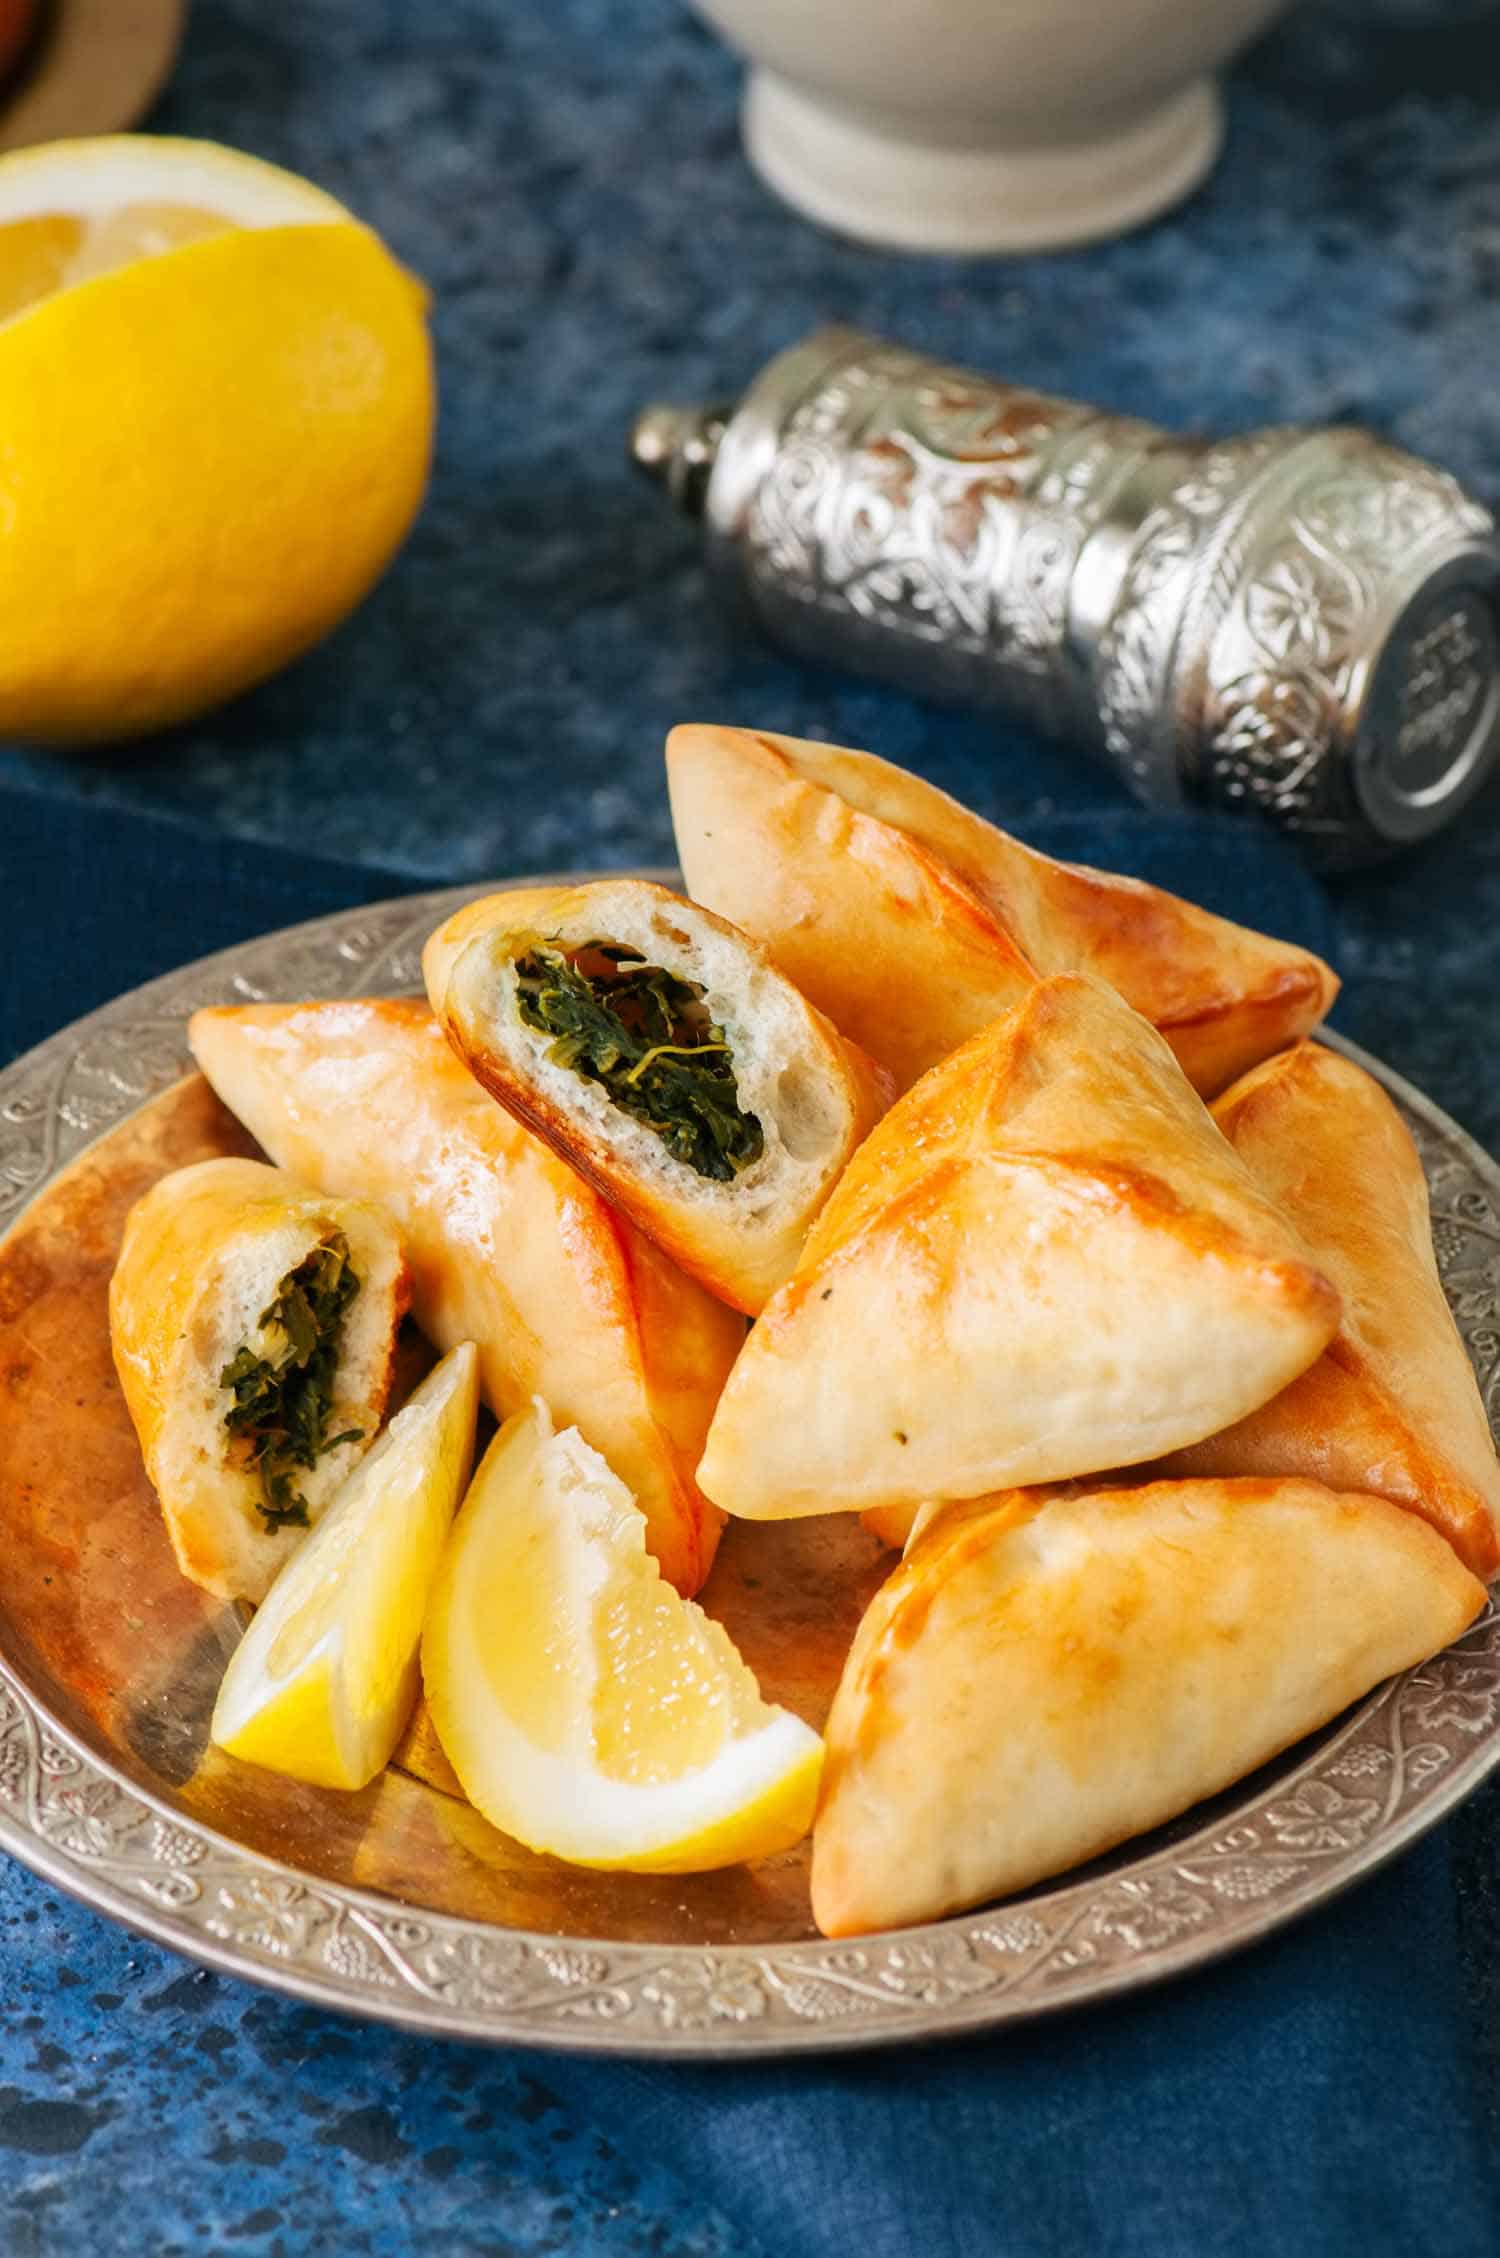 Arabic and middle eastern food concept. Fatayer sabanekh - traditional arabic spinach triangle hand pies on a blue stone background.